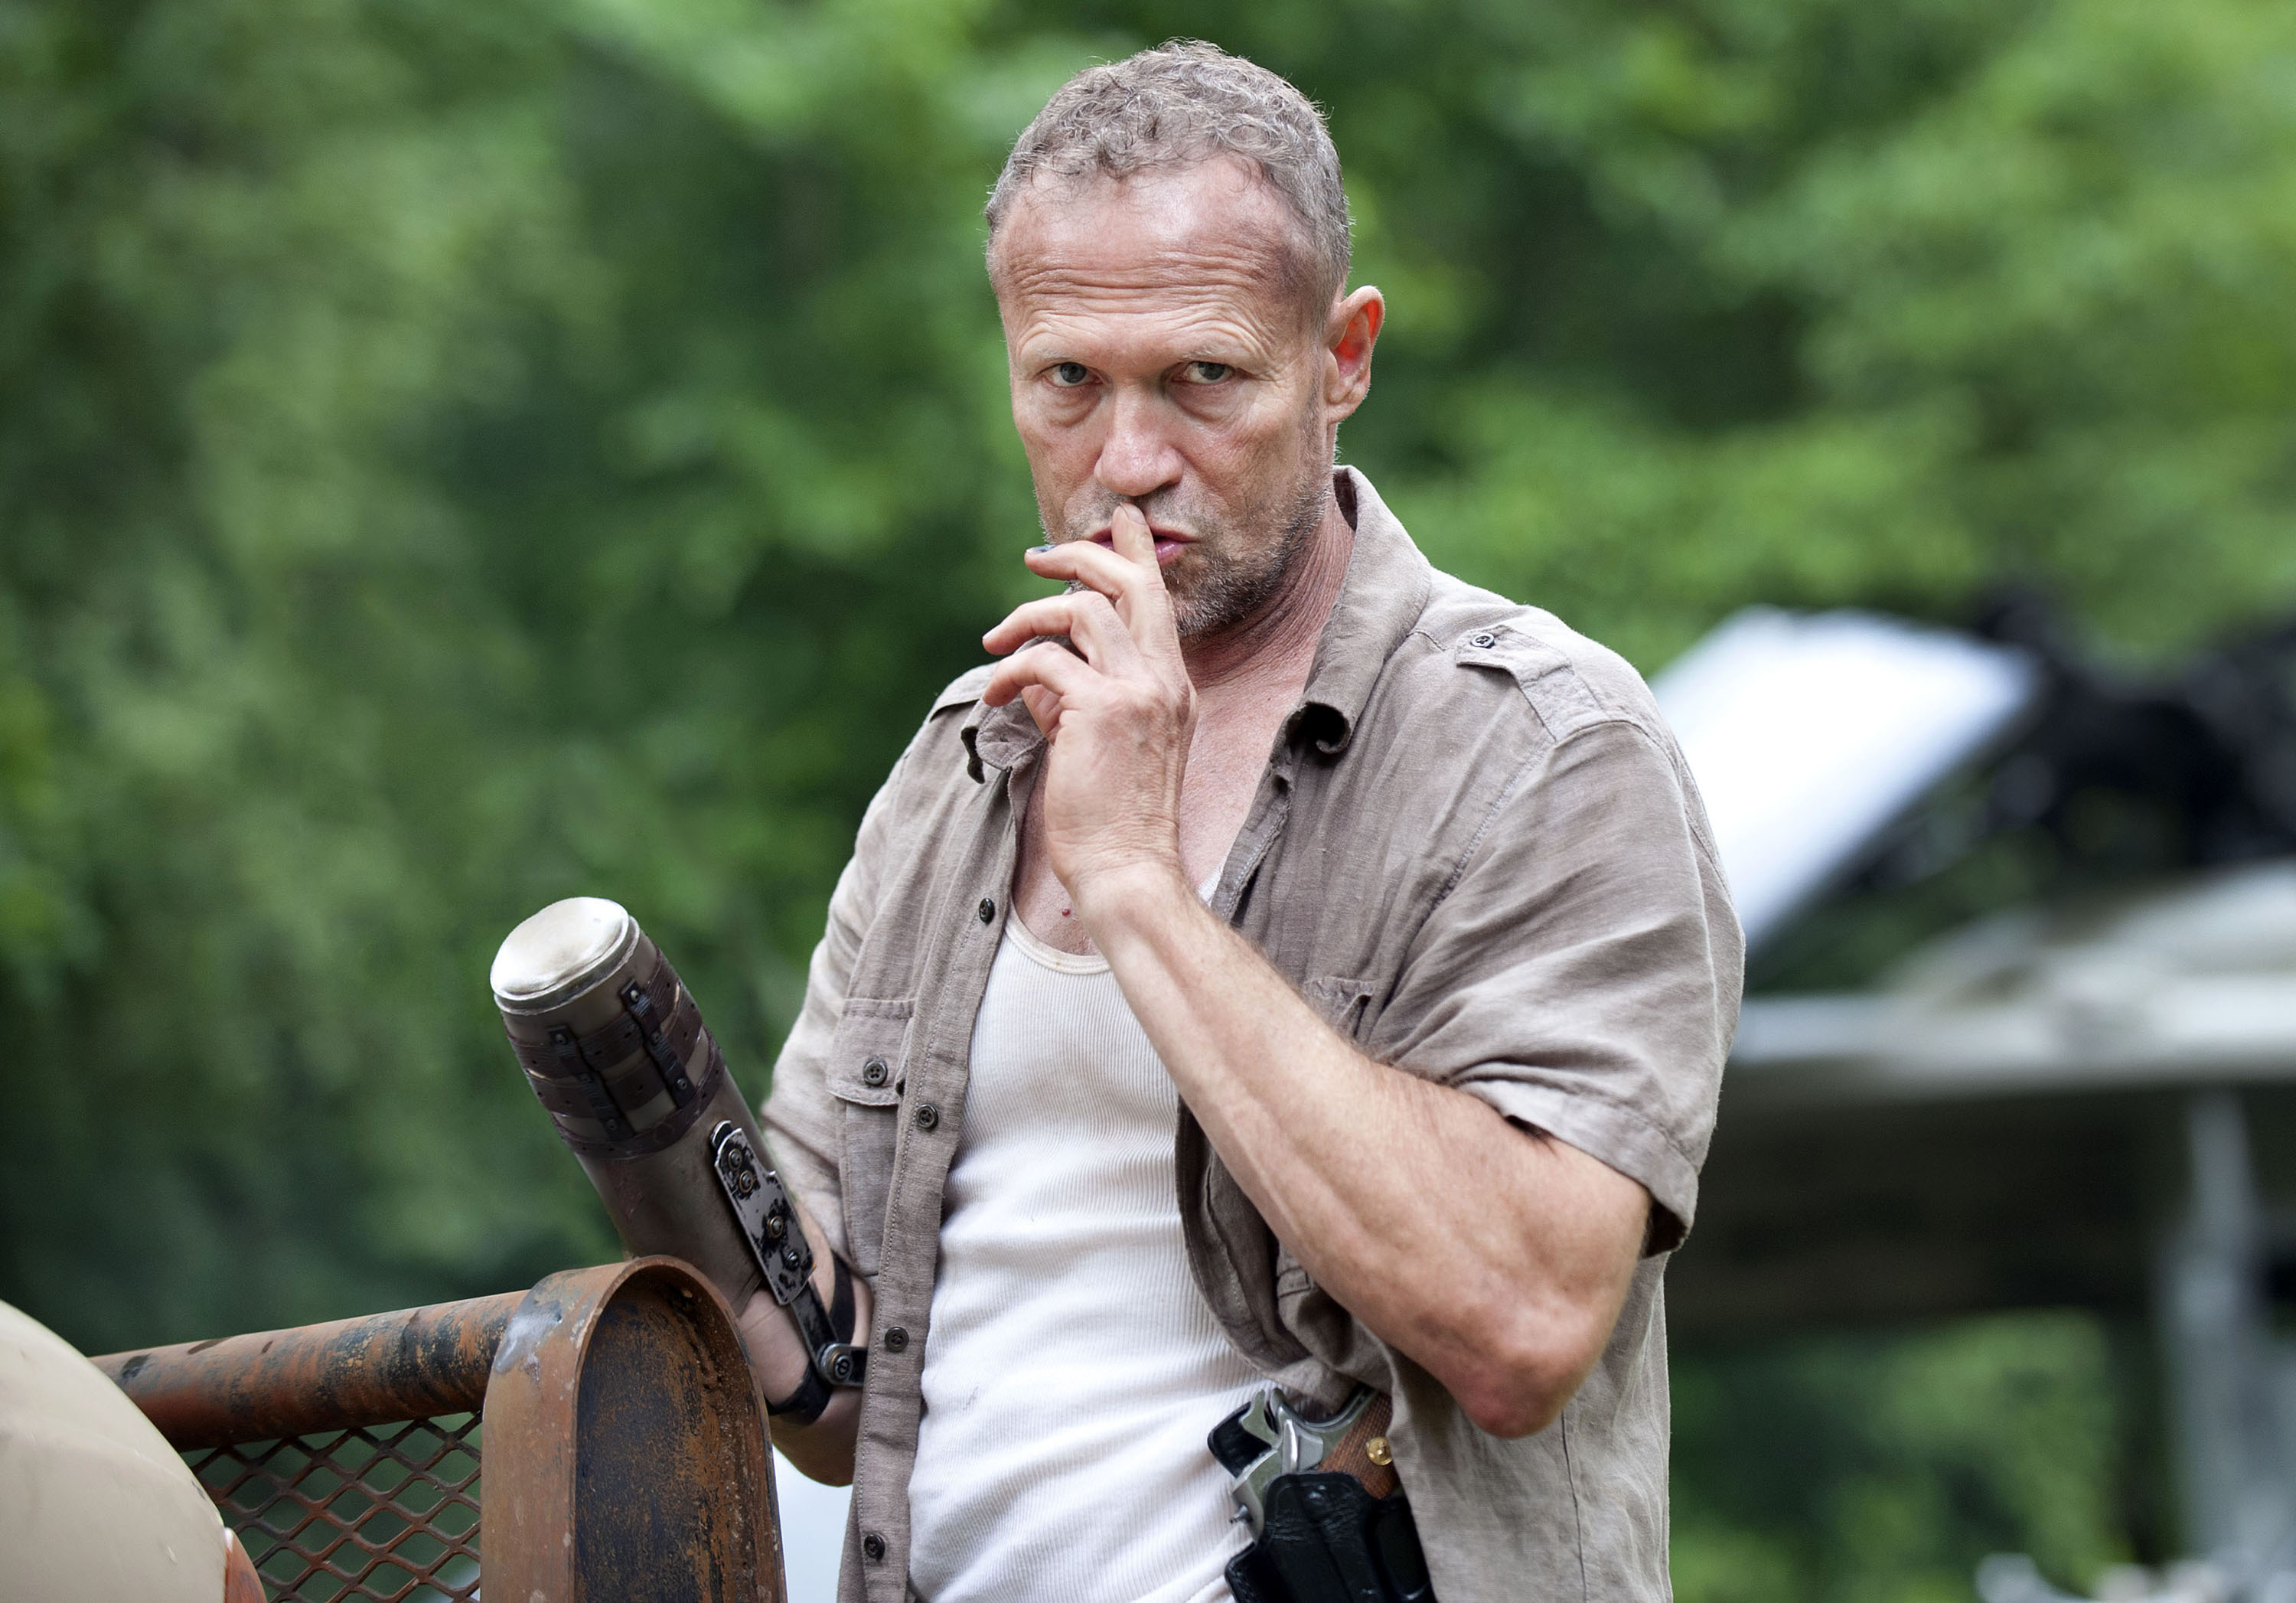 💀 How Well Do You Know “The Walking Dead”? Merle Dixon, The Walking Dead